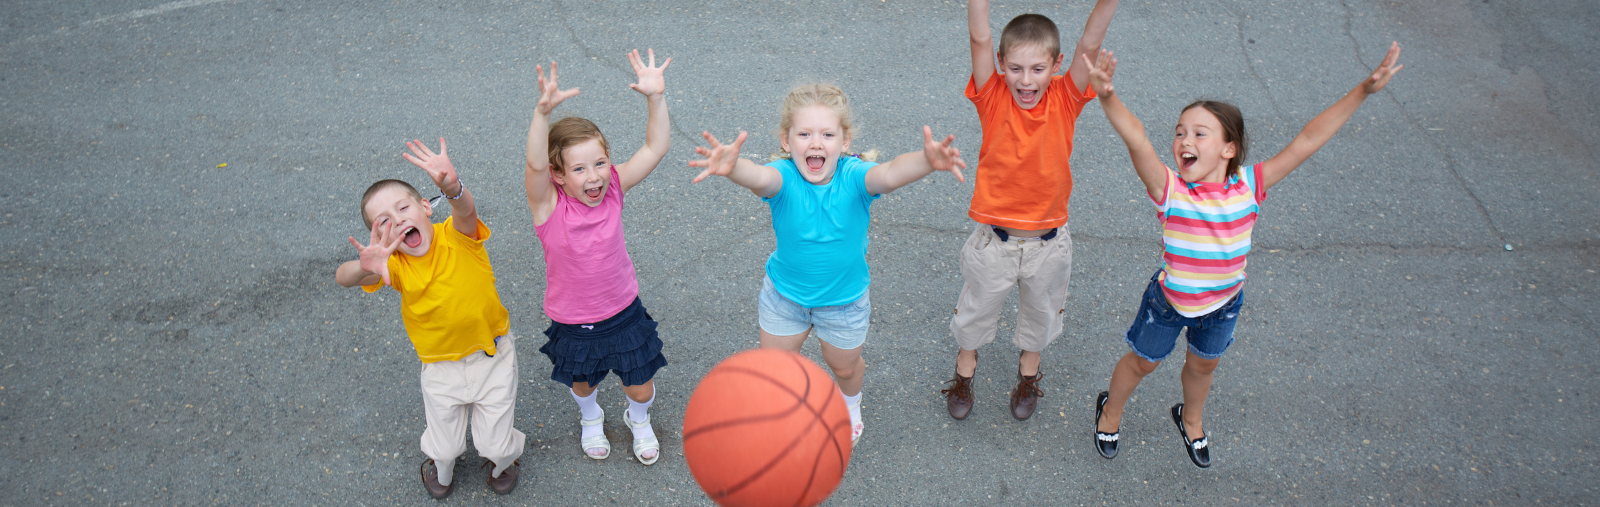 children on blacktop with basketball